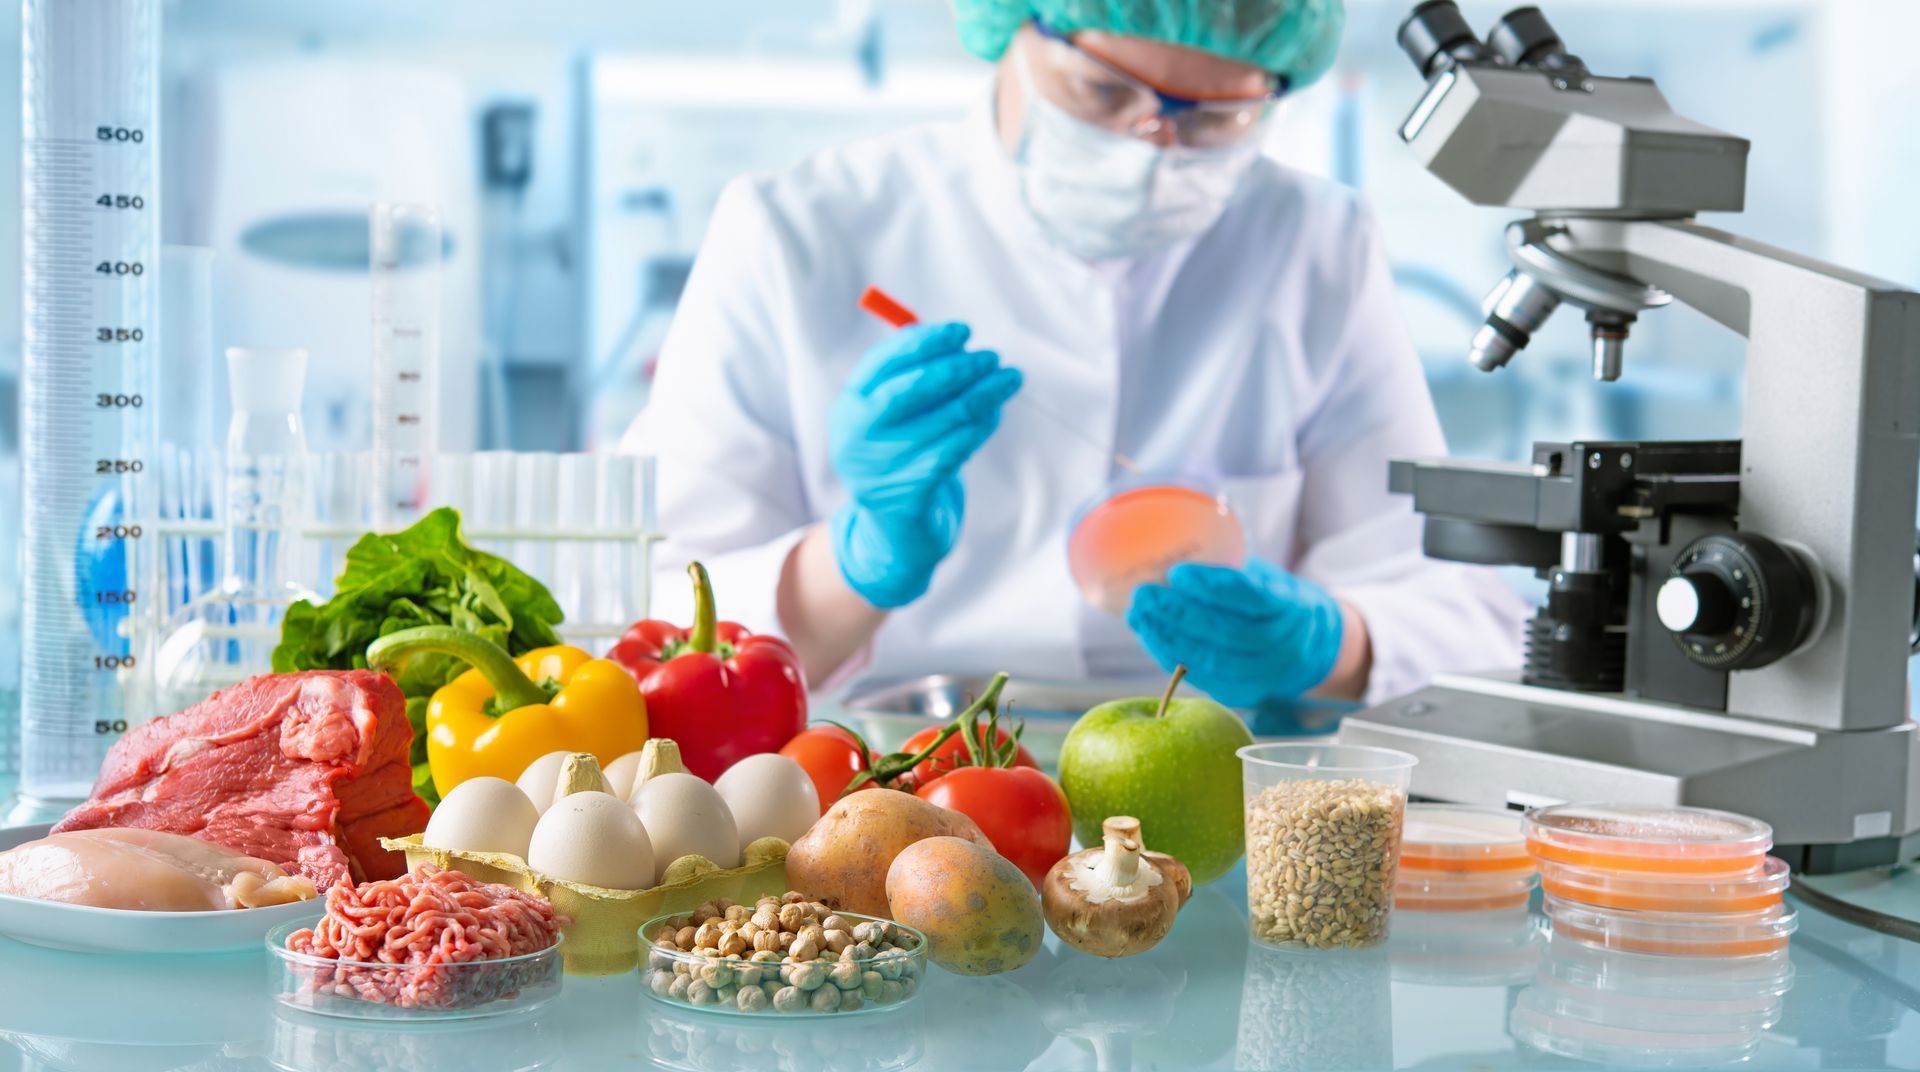 ISO 22000 - Food Safety